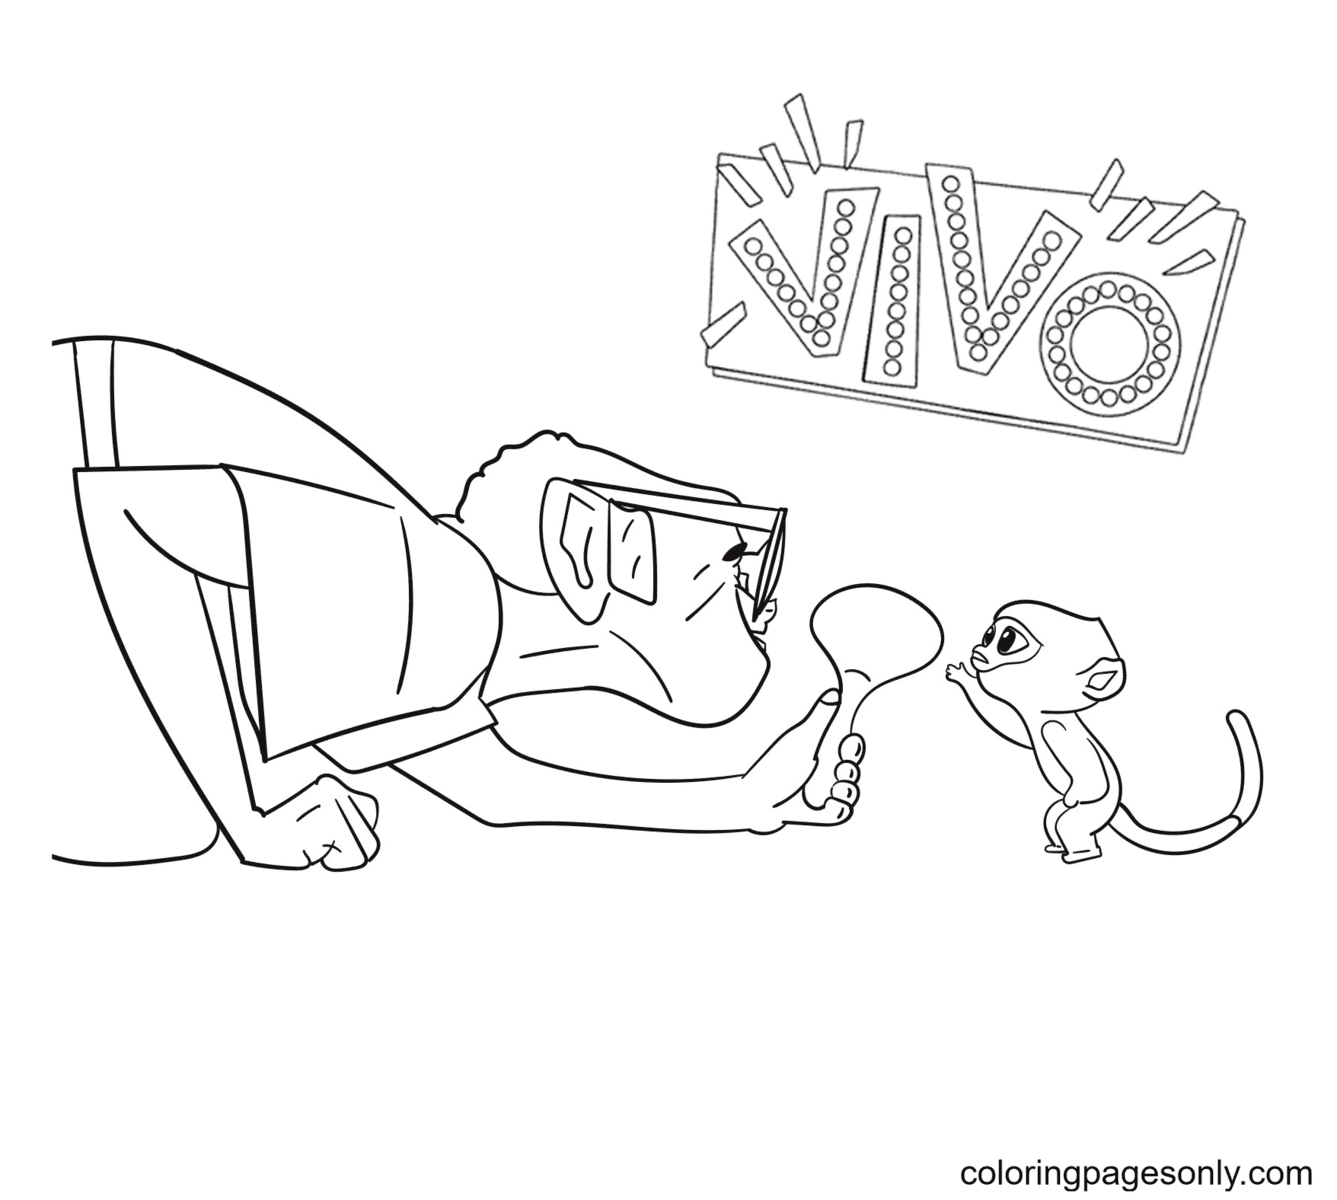 Andres Meeting Vivo Coloring Pages